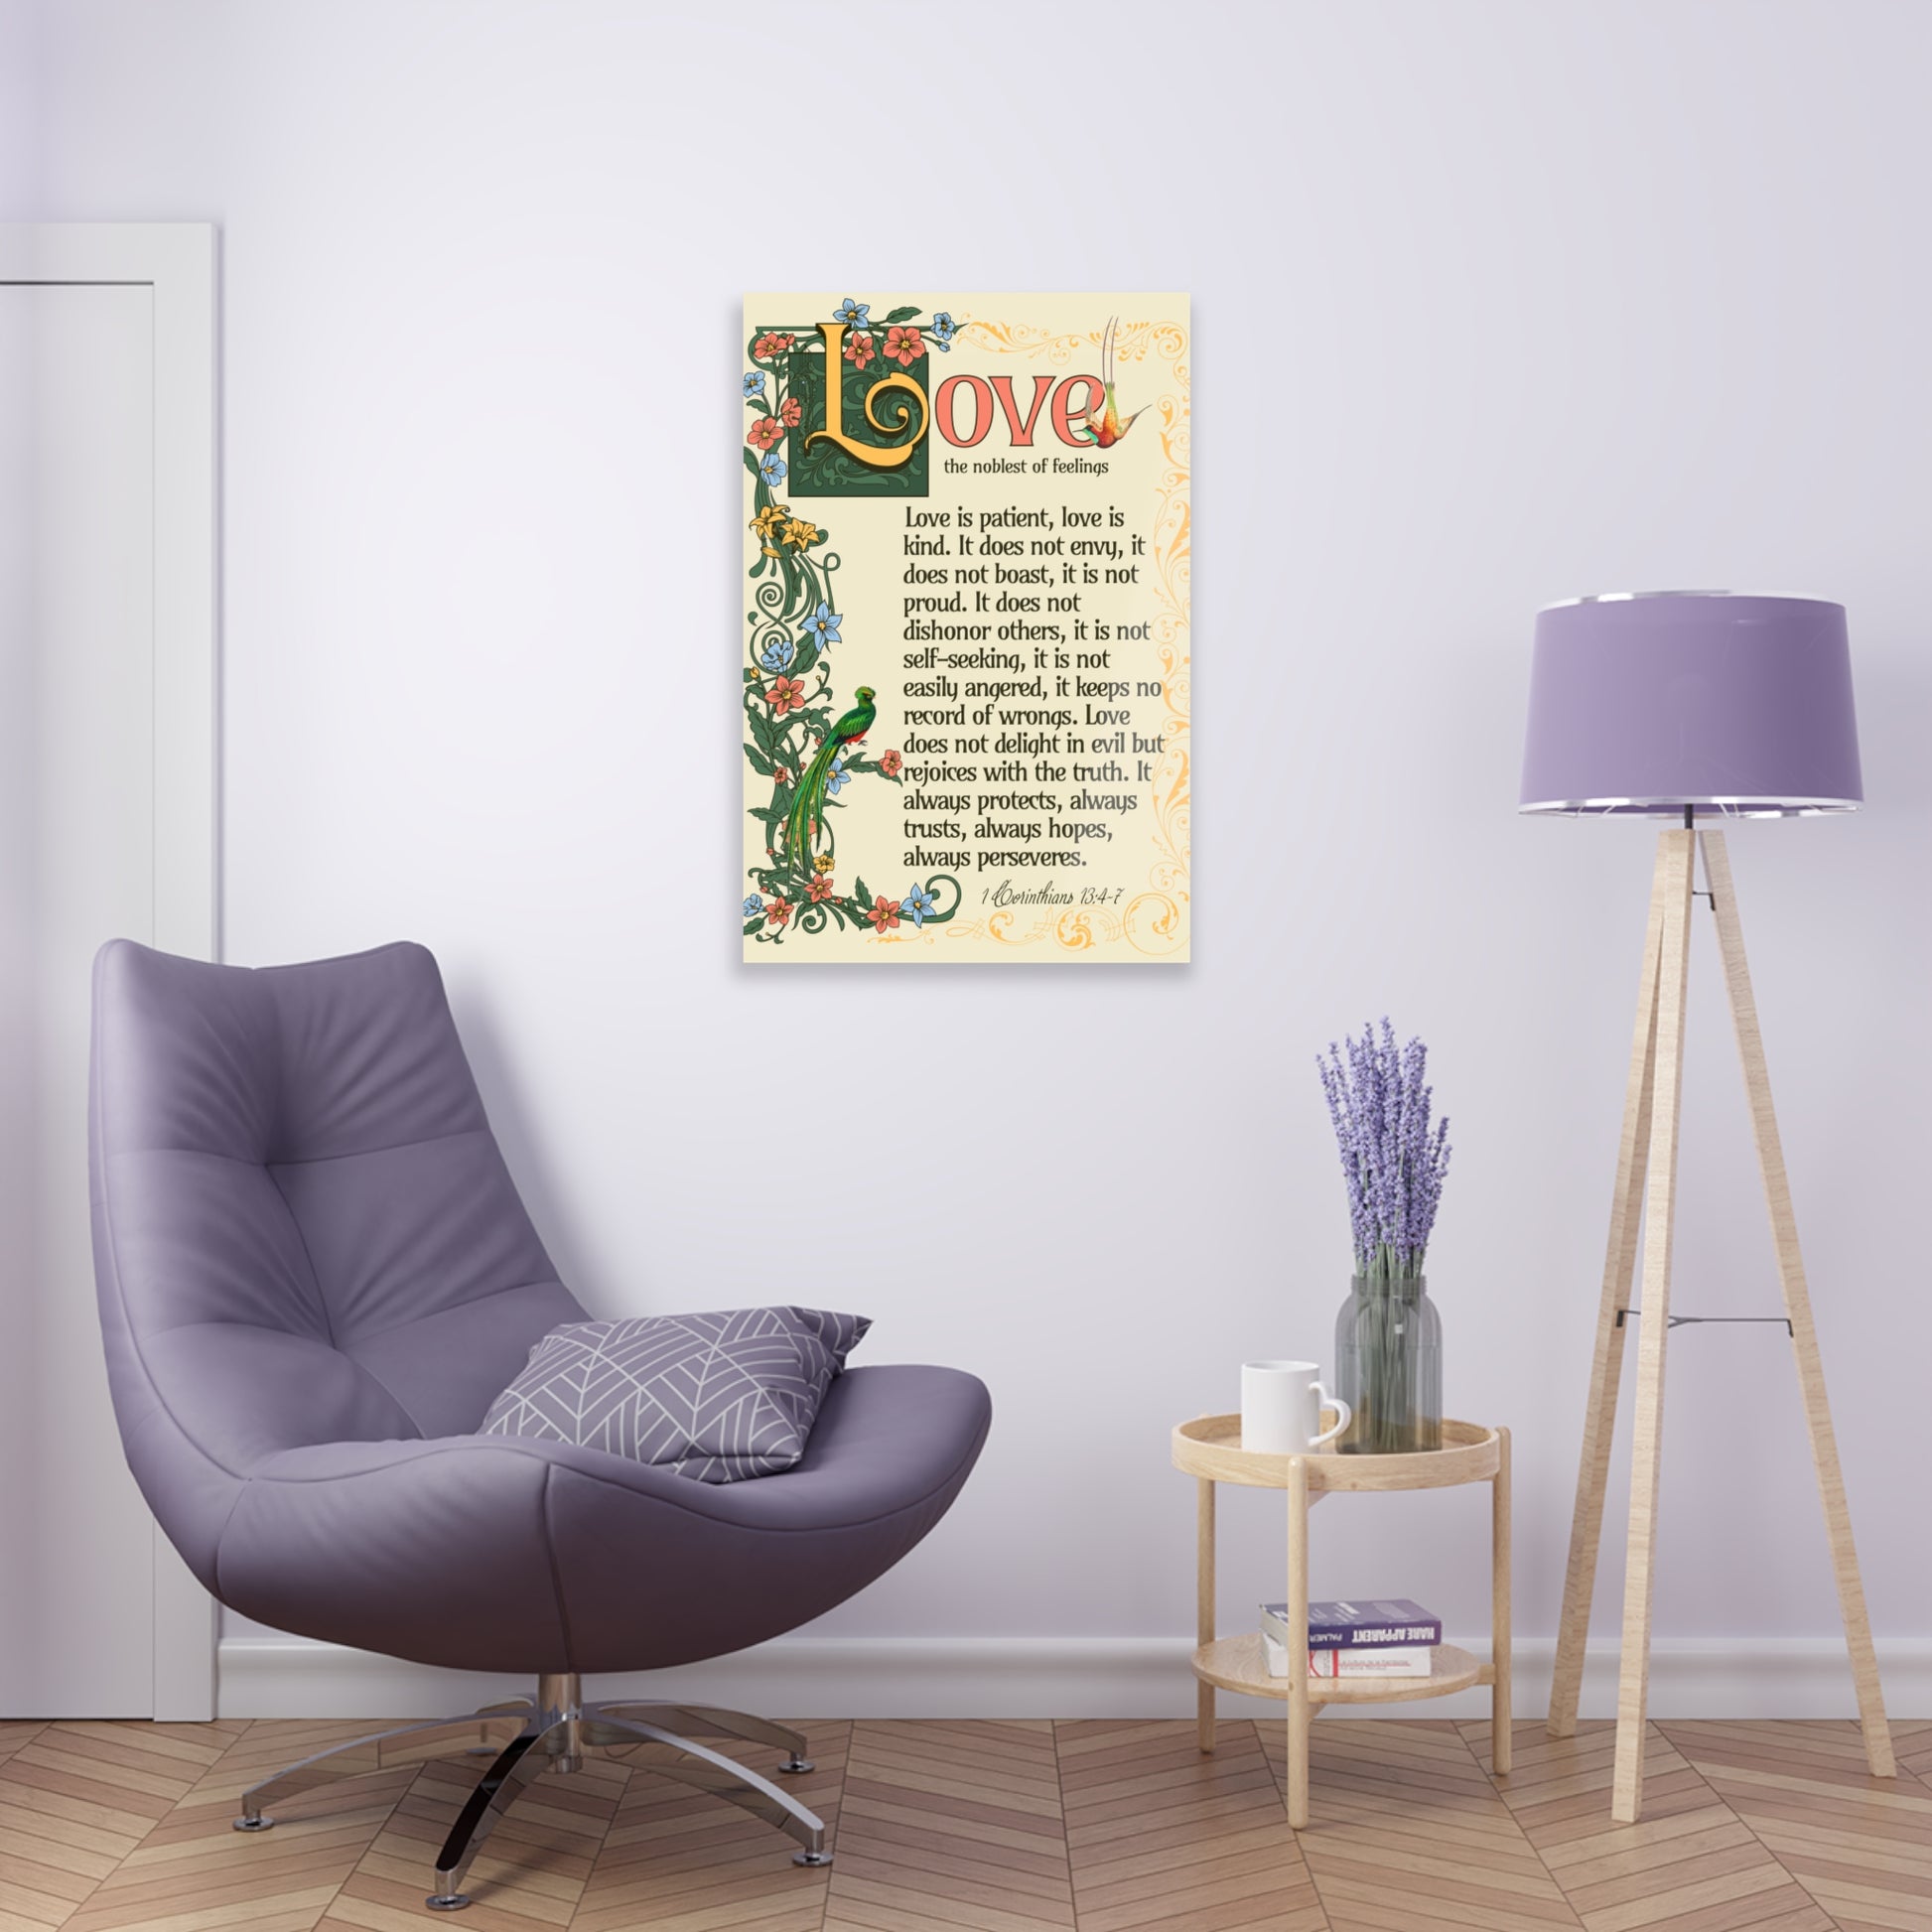 Acrylic Wall Scripture Art - Love Is Patient | Art & Wall Decor,Assembled in the USA,Assembled in USA,Decor,Home & Living,Home Decor,Indoor,Made in the USA,Made in USA,Poster